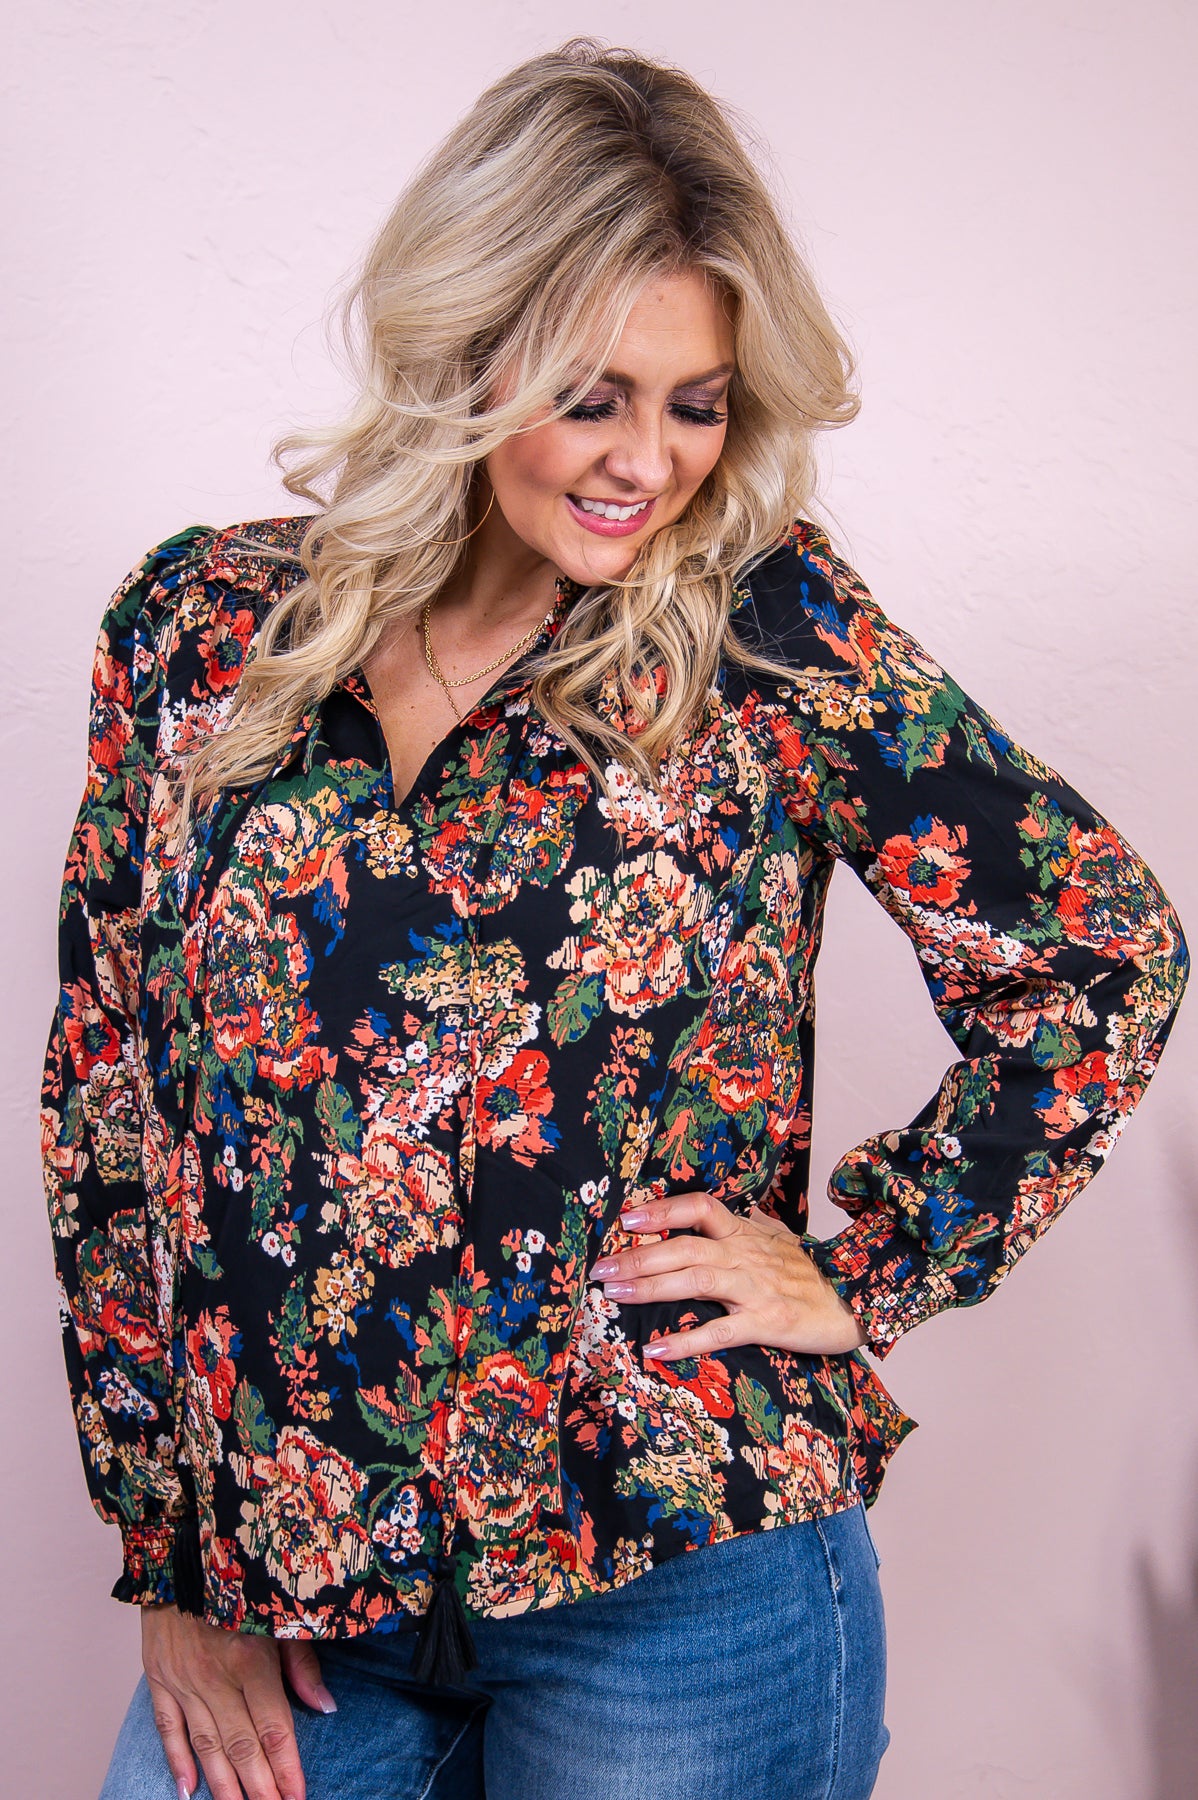 Gather The Courage Black/Multi Color Floral Top - T7984BK